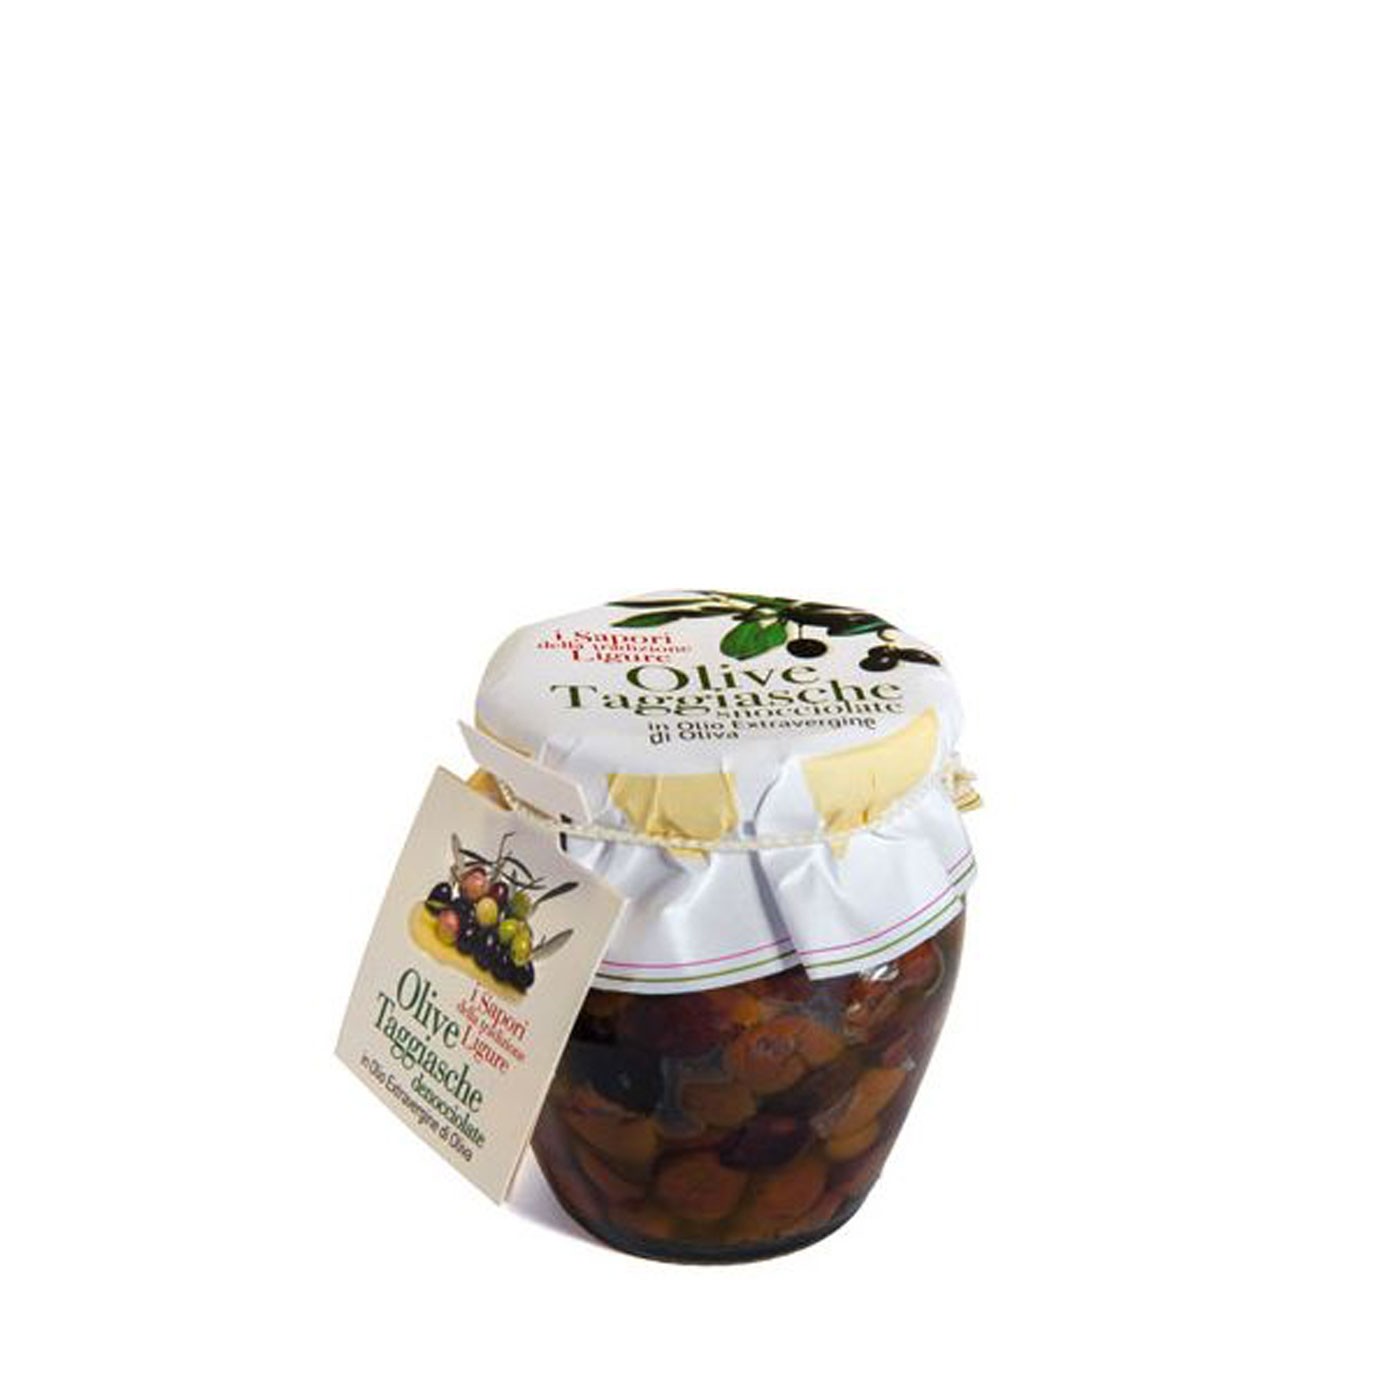 Pitted Taggiasca Olives 6.35 oz